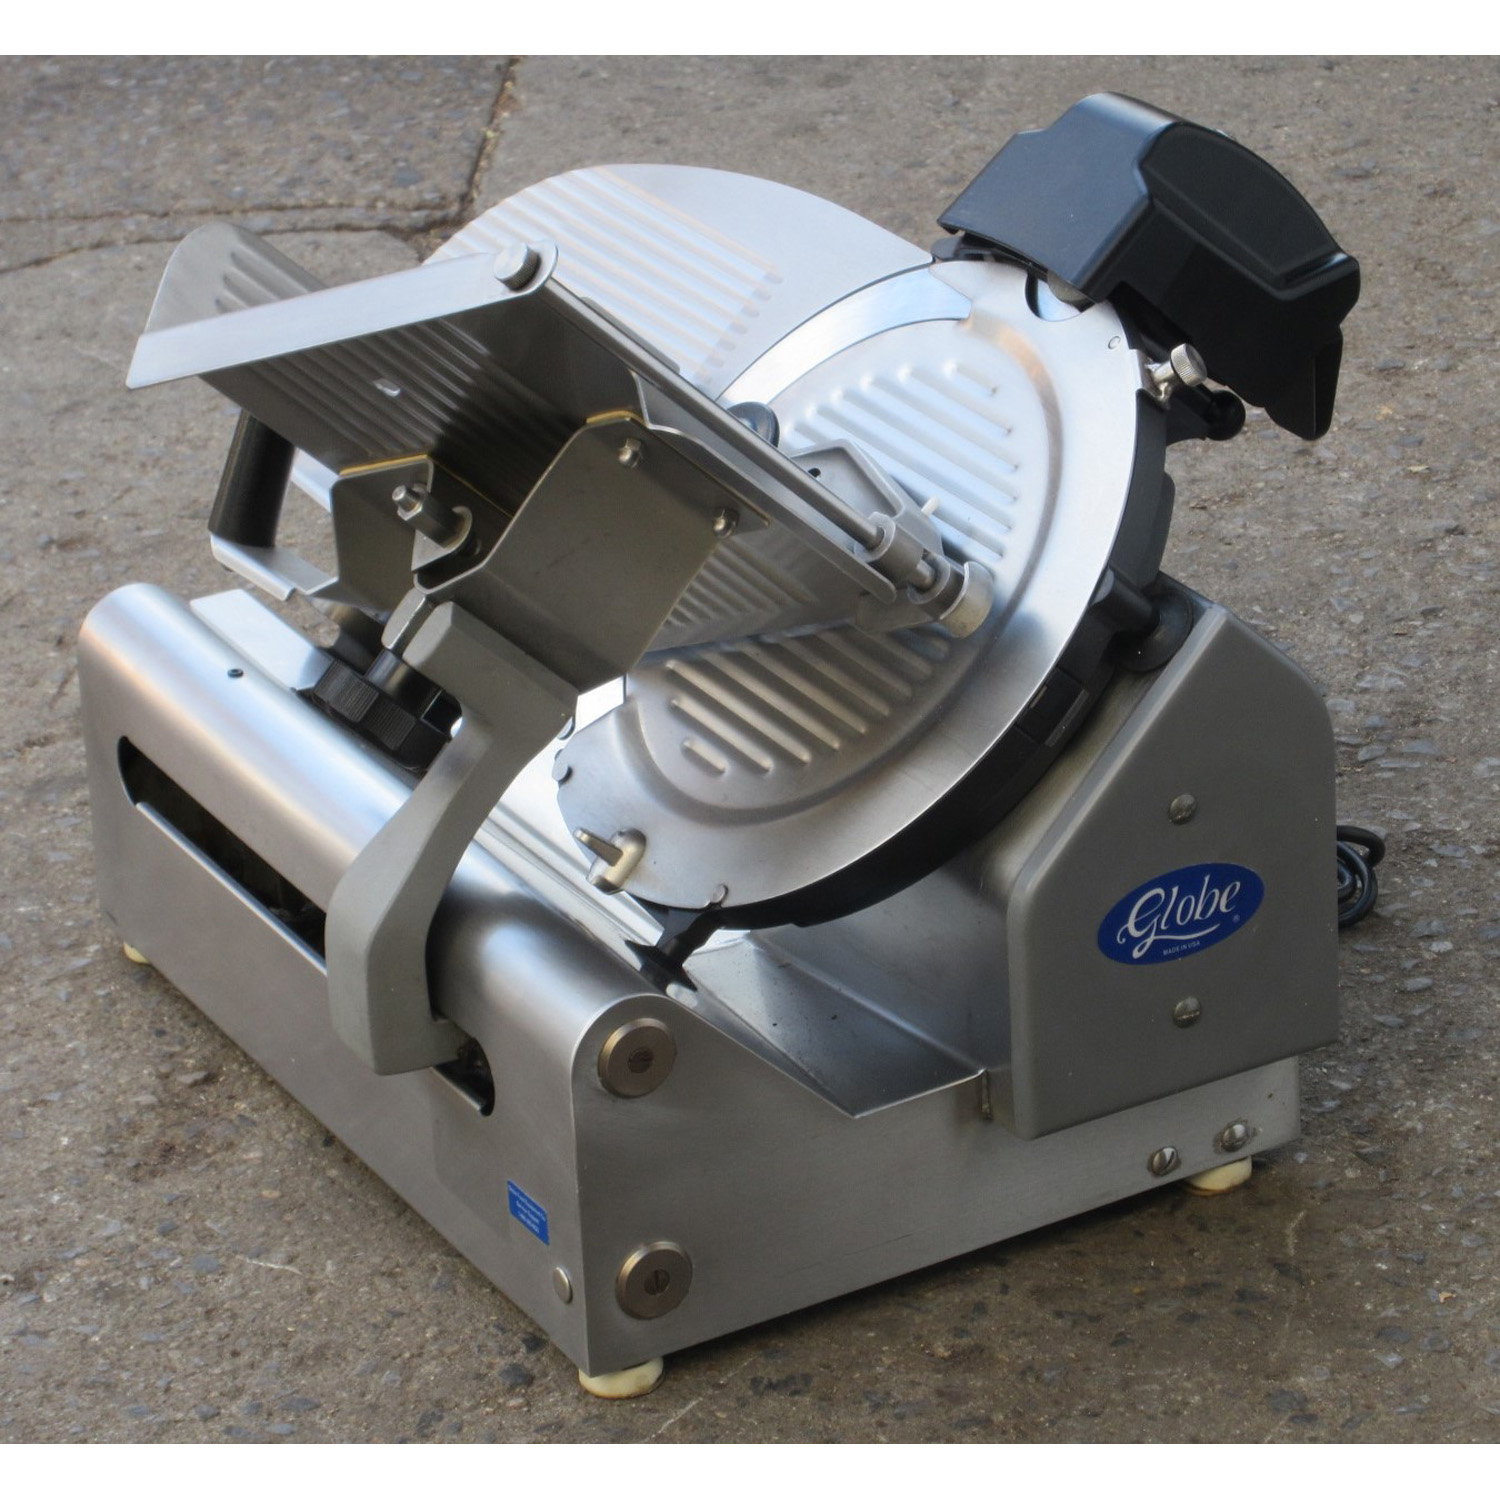 Globe 3600N Meat Slicer, Used Great Condition image 1